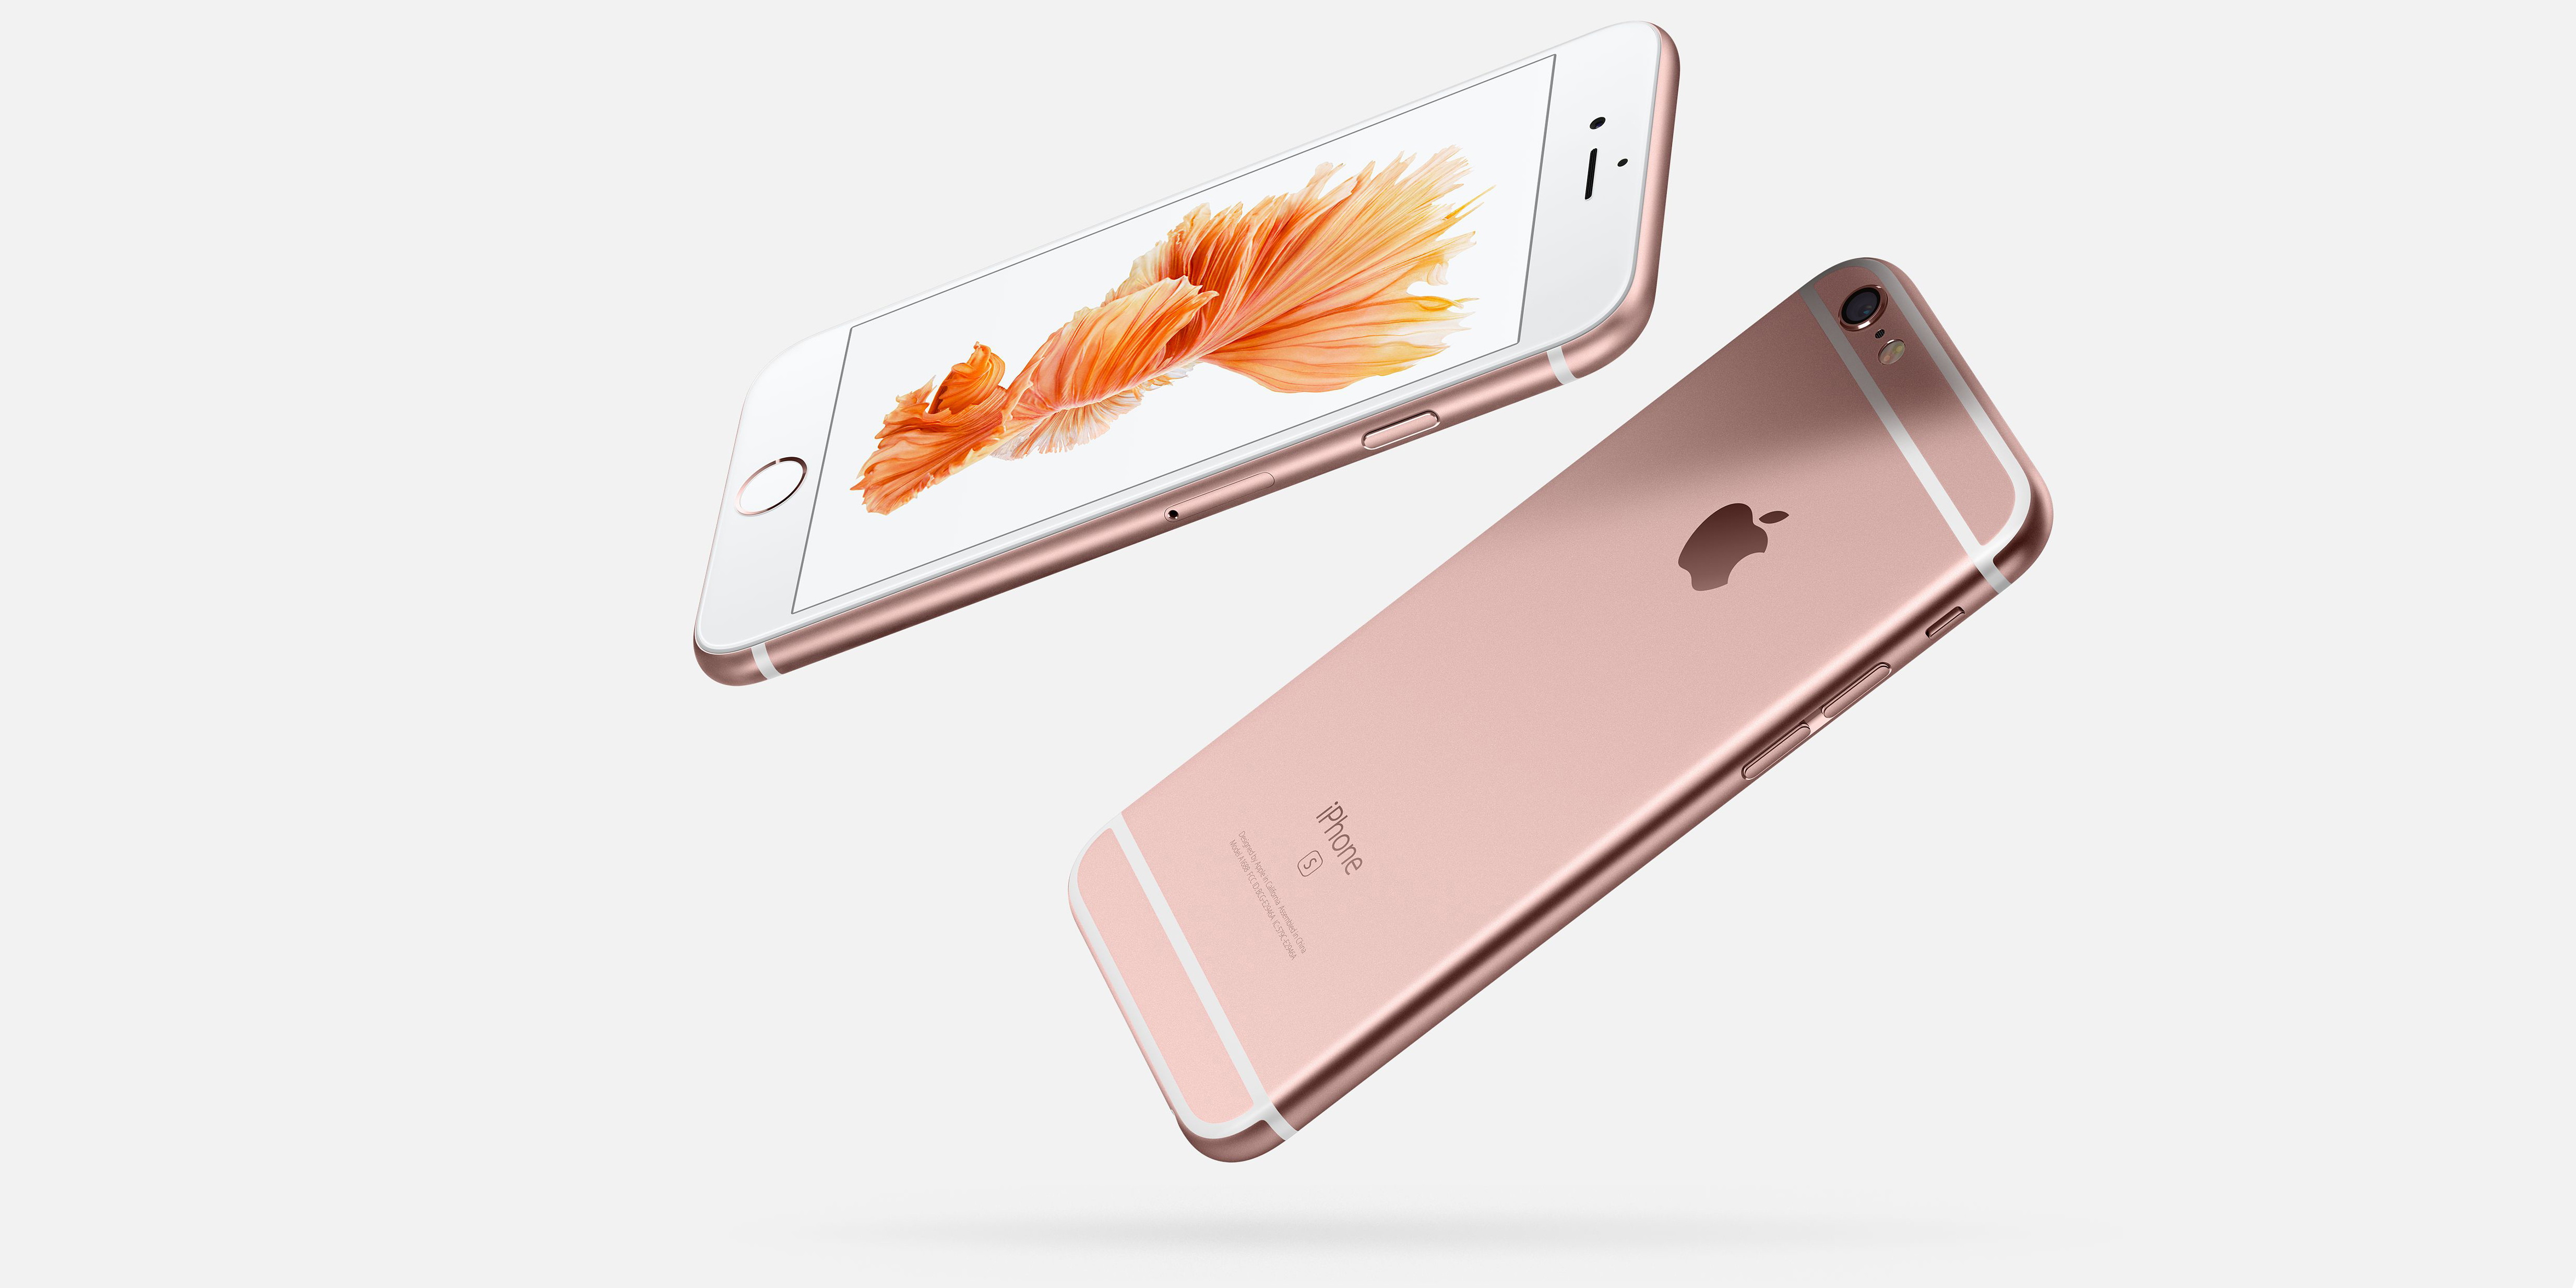 Exclusive: AT&T to offer prepaid iPhone 6s for $300 (6s Plus for $400) on $45  month plan - 9to5Mac